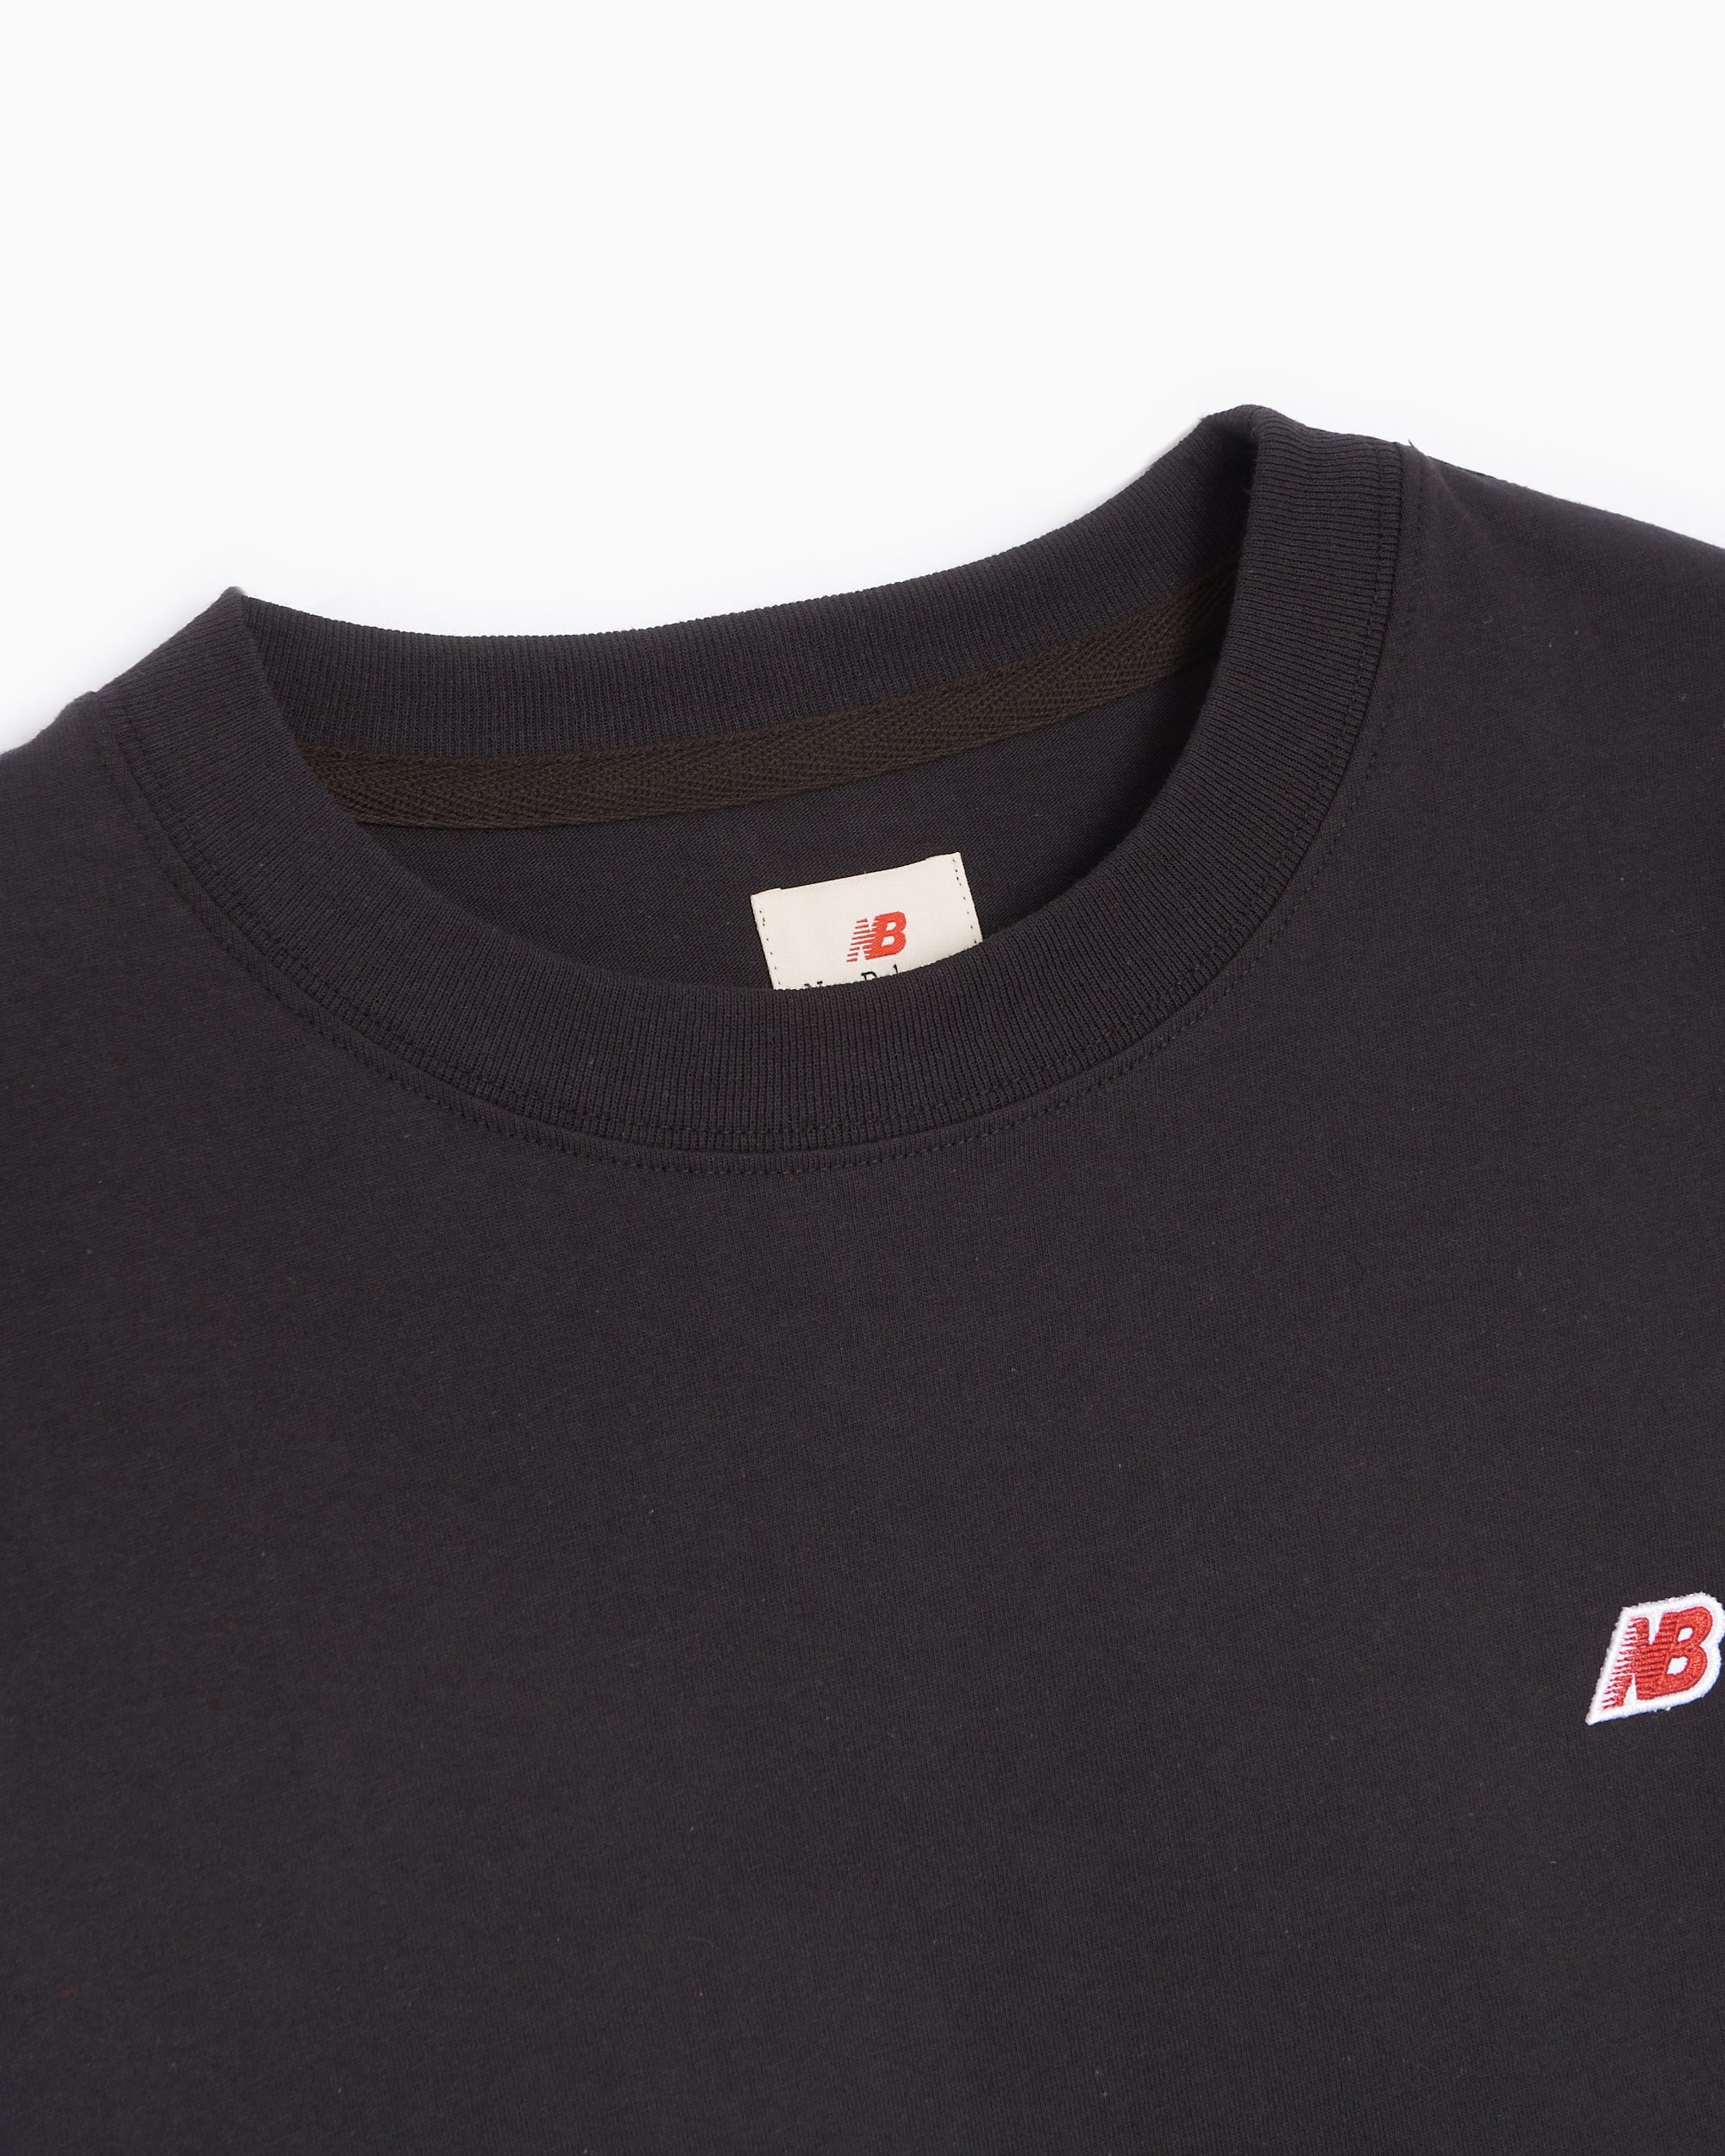 New Balance Made in USA Online FOOTDISTRICT Unisex Black Buy T-Shirt Core MT21543-BK| at